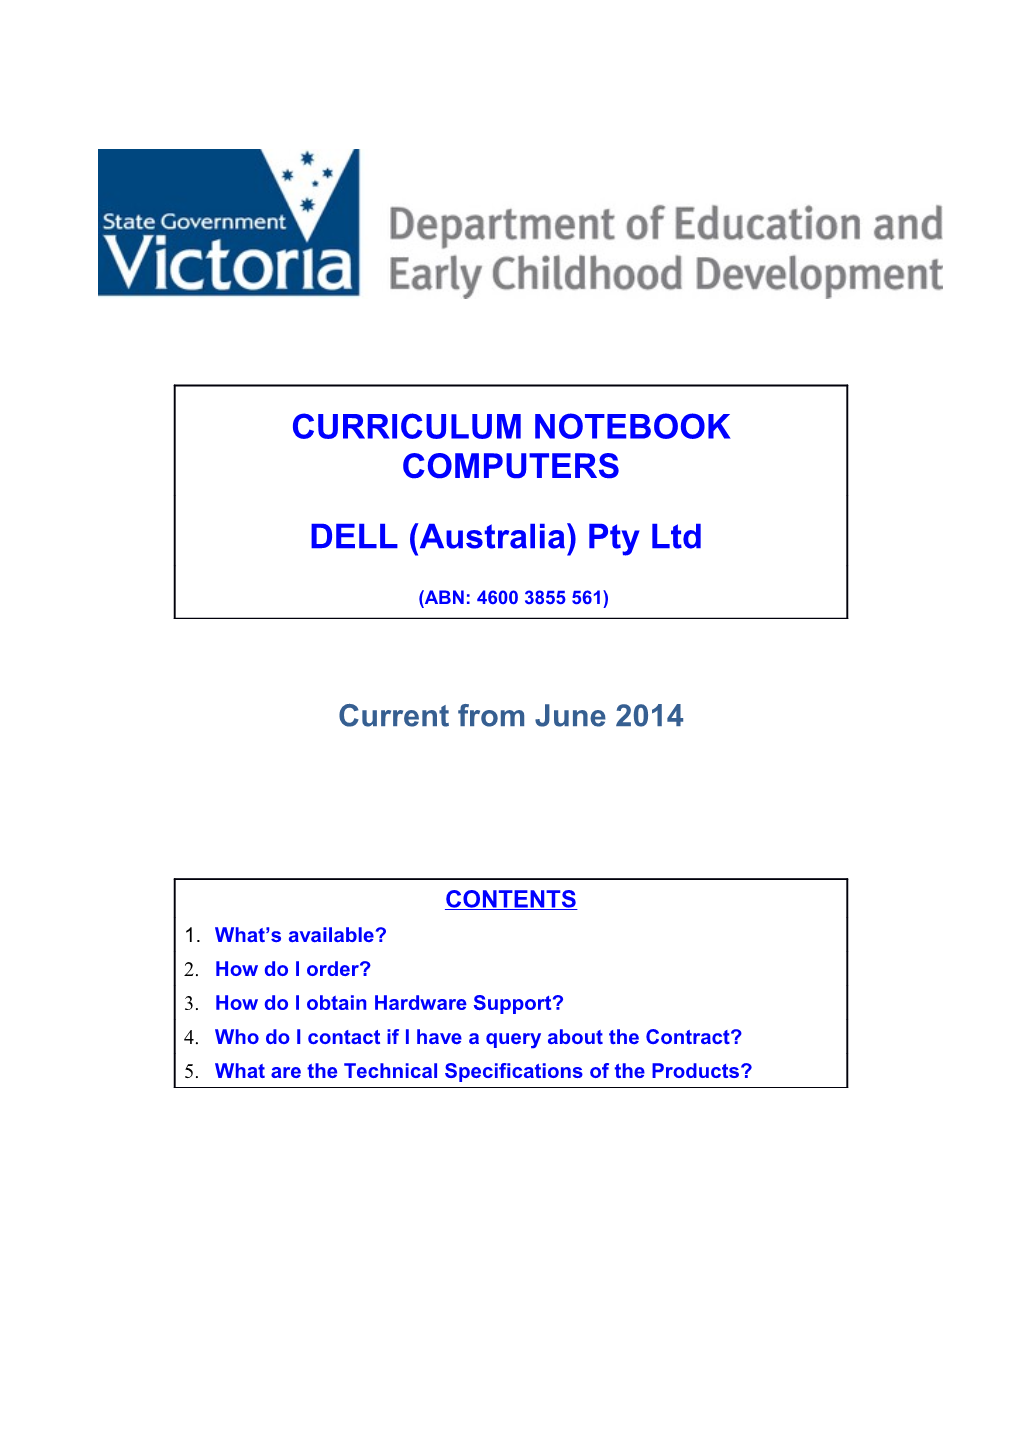 Pricing Schedule for Curriculum Notebook Computers from Toshiba (Australia) Pty Ltd